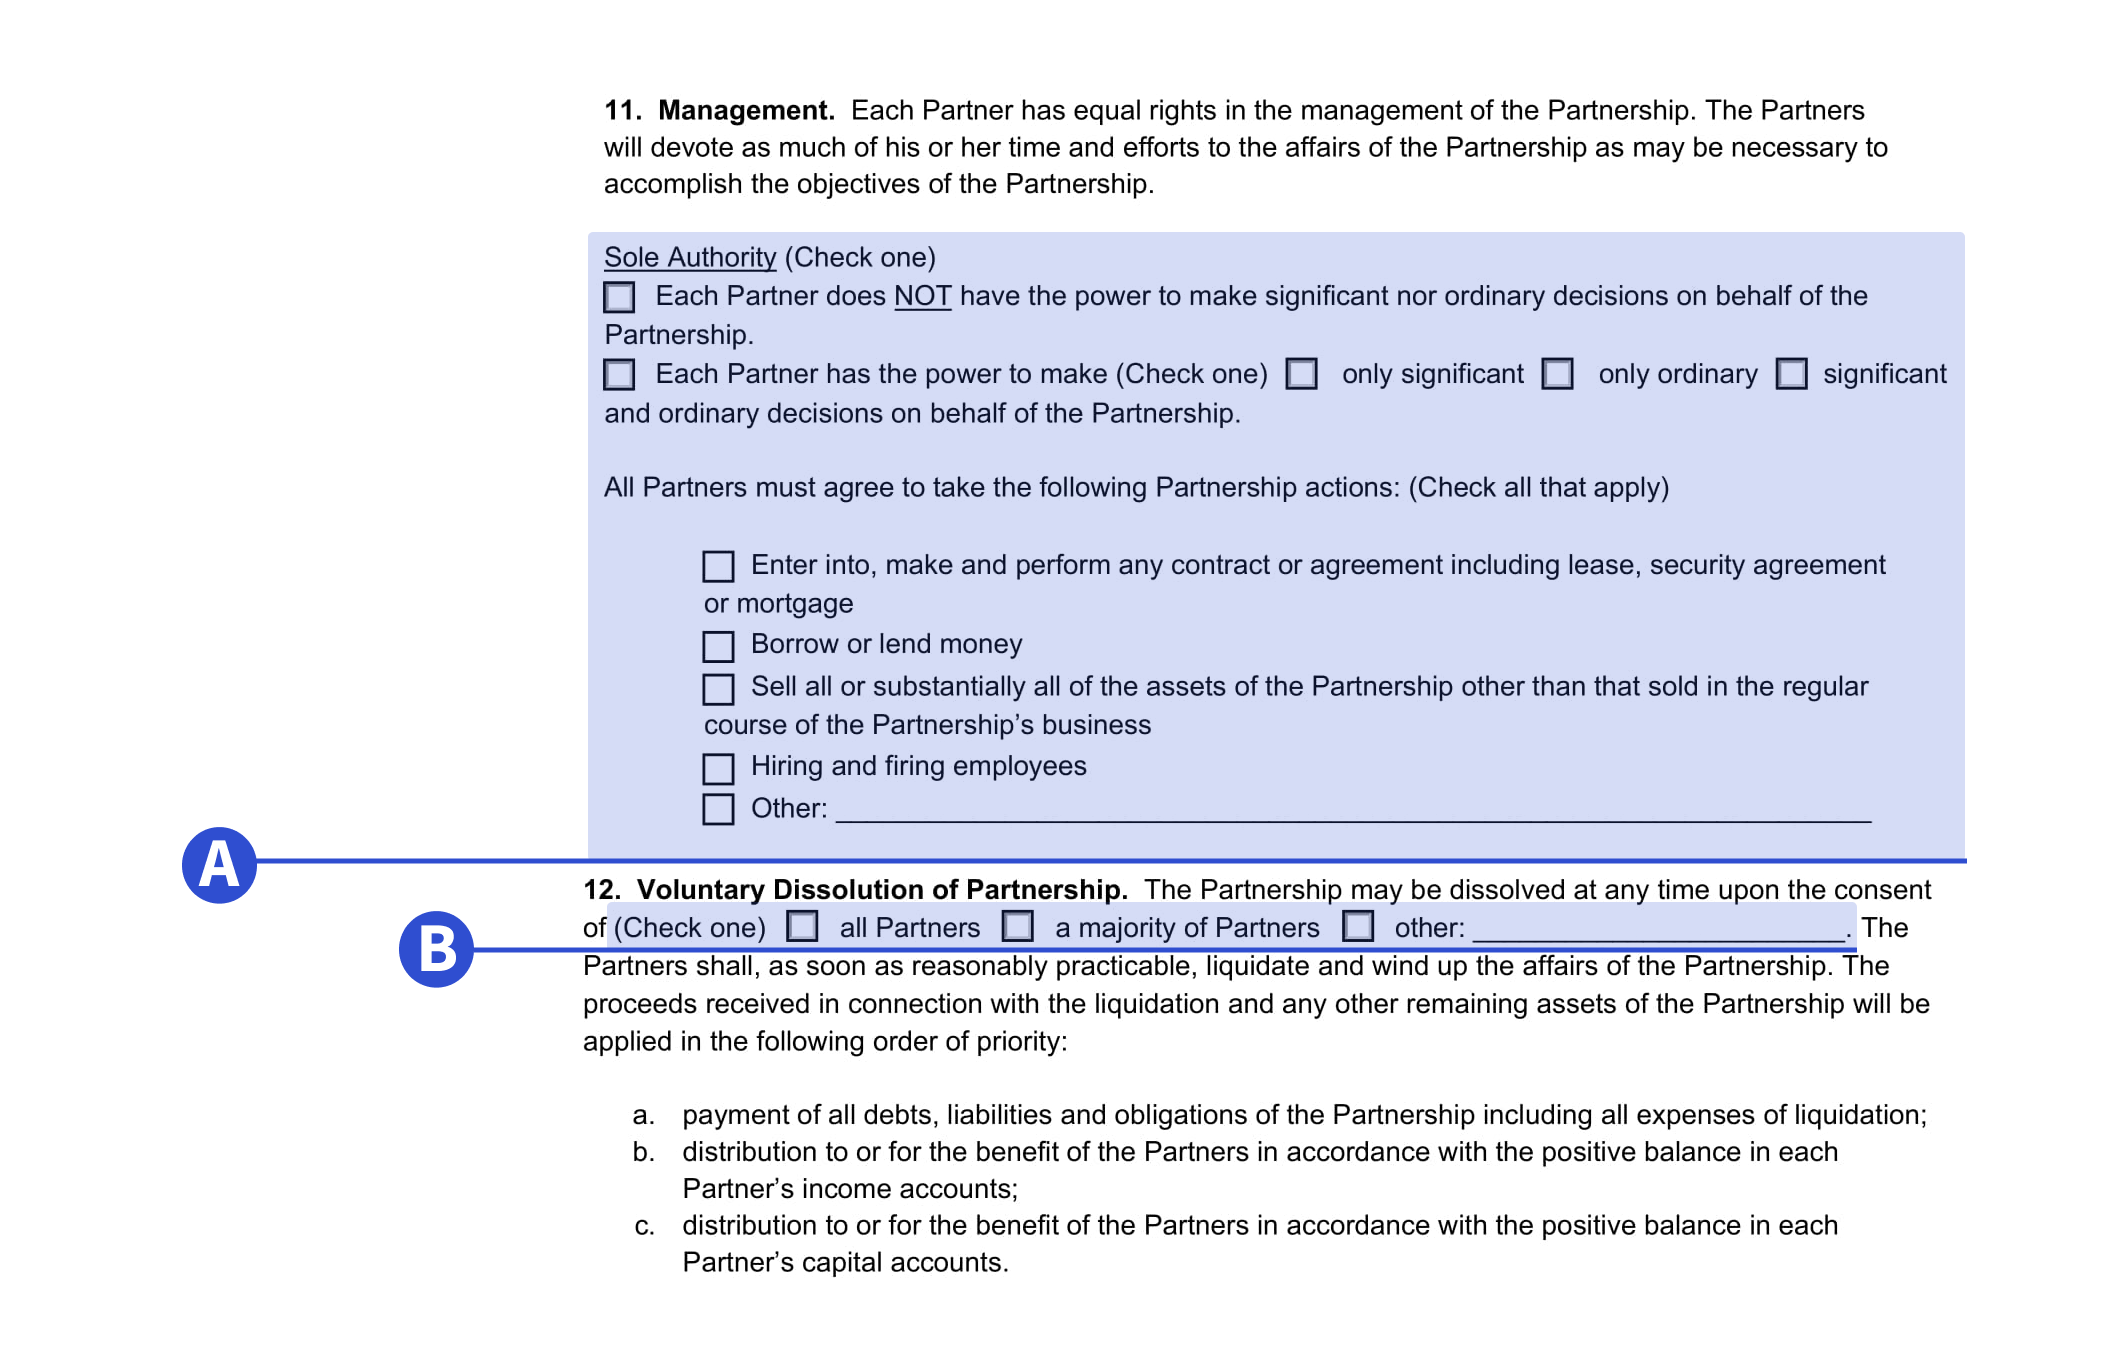 An example of where to include management and voluntary dissolution of partnership details in our 50-50 template.